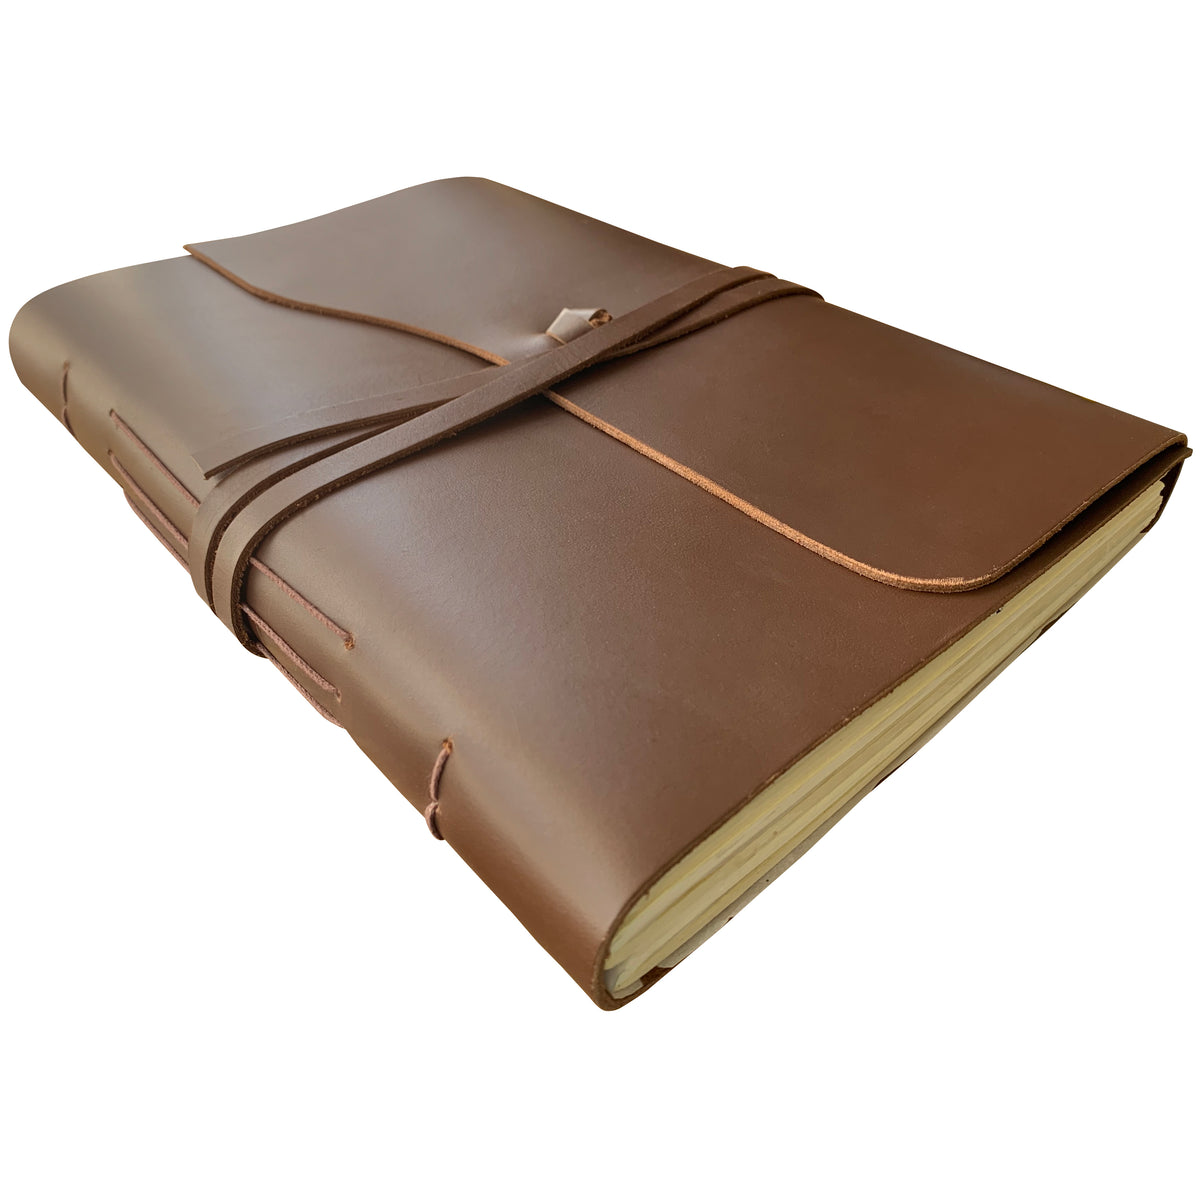 Rustico Large Family Leather Photo Album - Mike's Camera